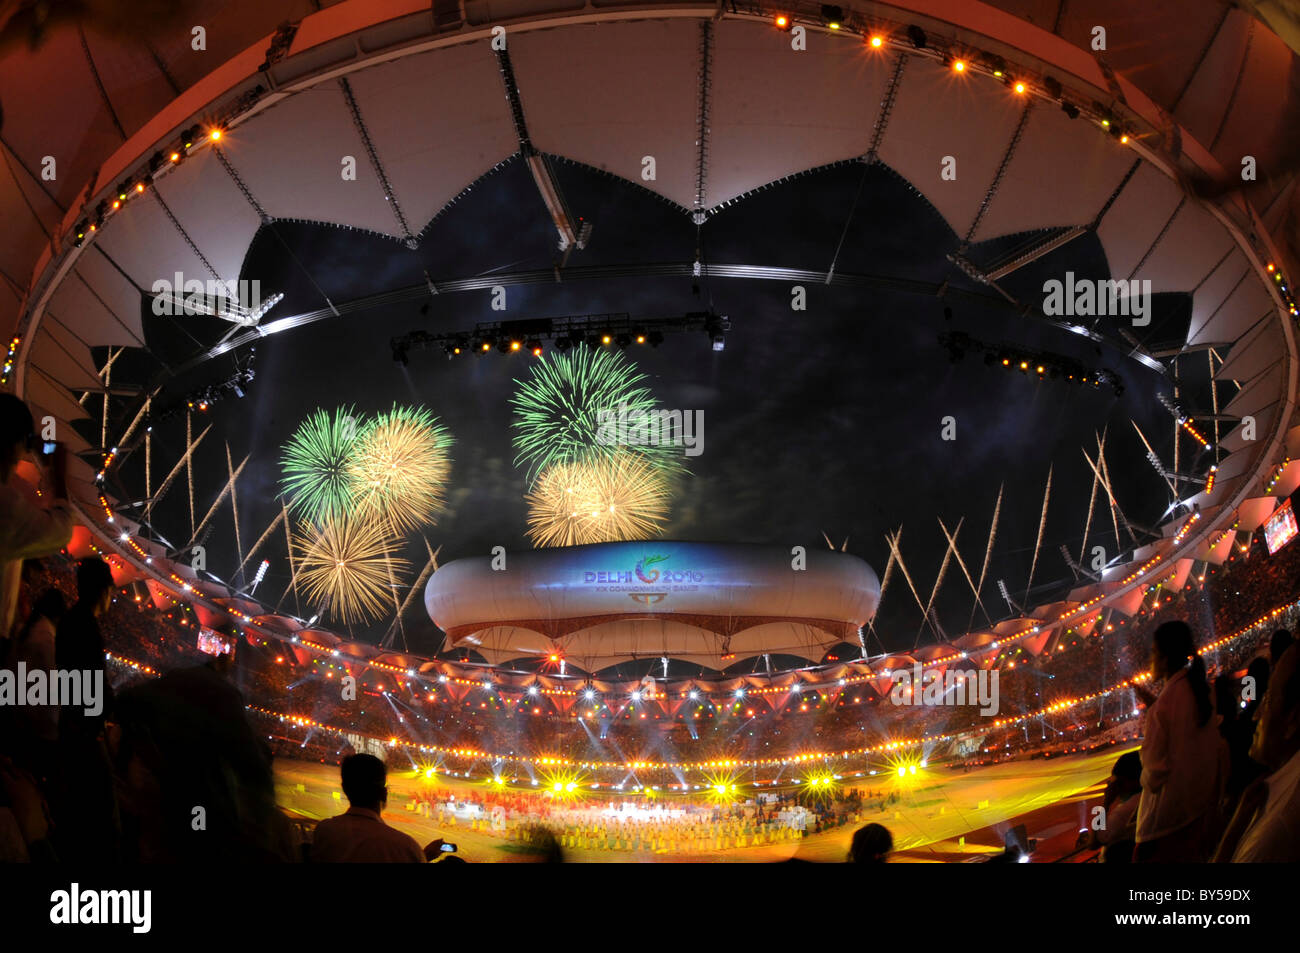 India Delhi Opening ceremony of XIX 2010 Commonwealth Games at the Jawaharlal Nehru Stadium with fireworks display. Stock Photo